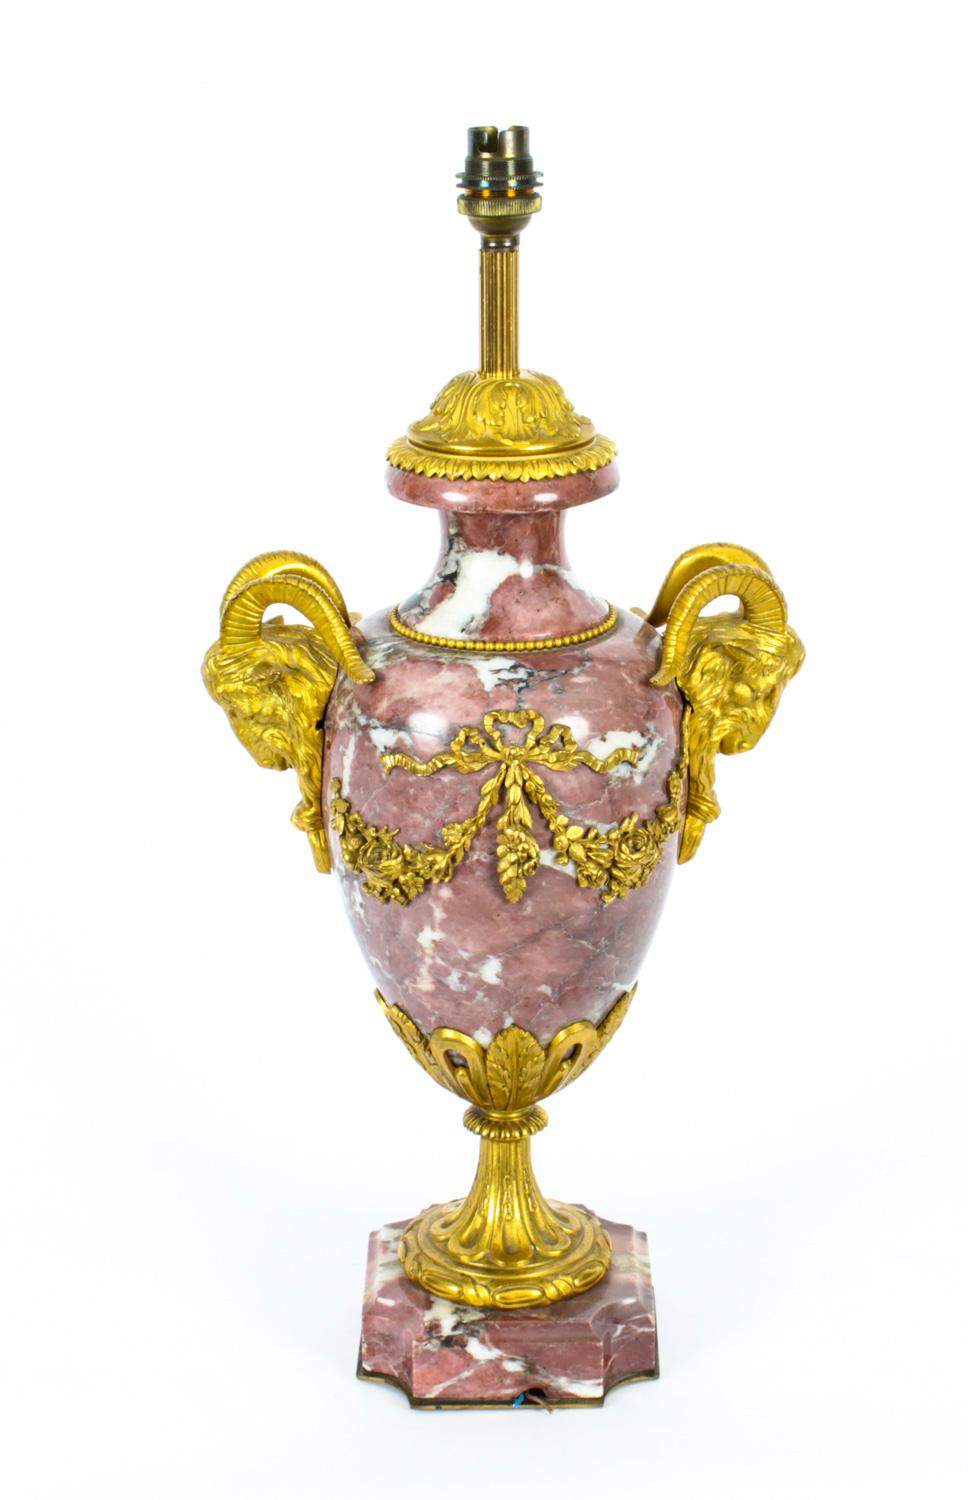 A beautiful French pink marble and ormolu mounted table lamp, C1920 in date.

This beautiful ormolu mounted mable table lamp is decorated with superb ormolu floral garlands with rams head mounts on a shaped base.

Provenance:
From the